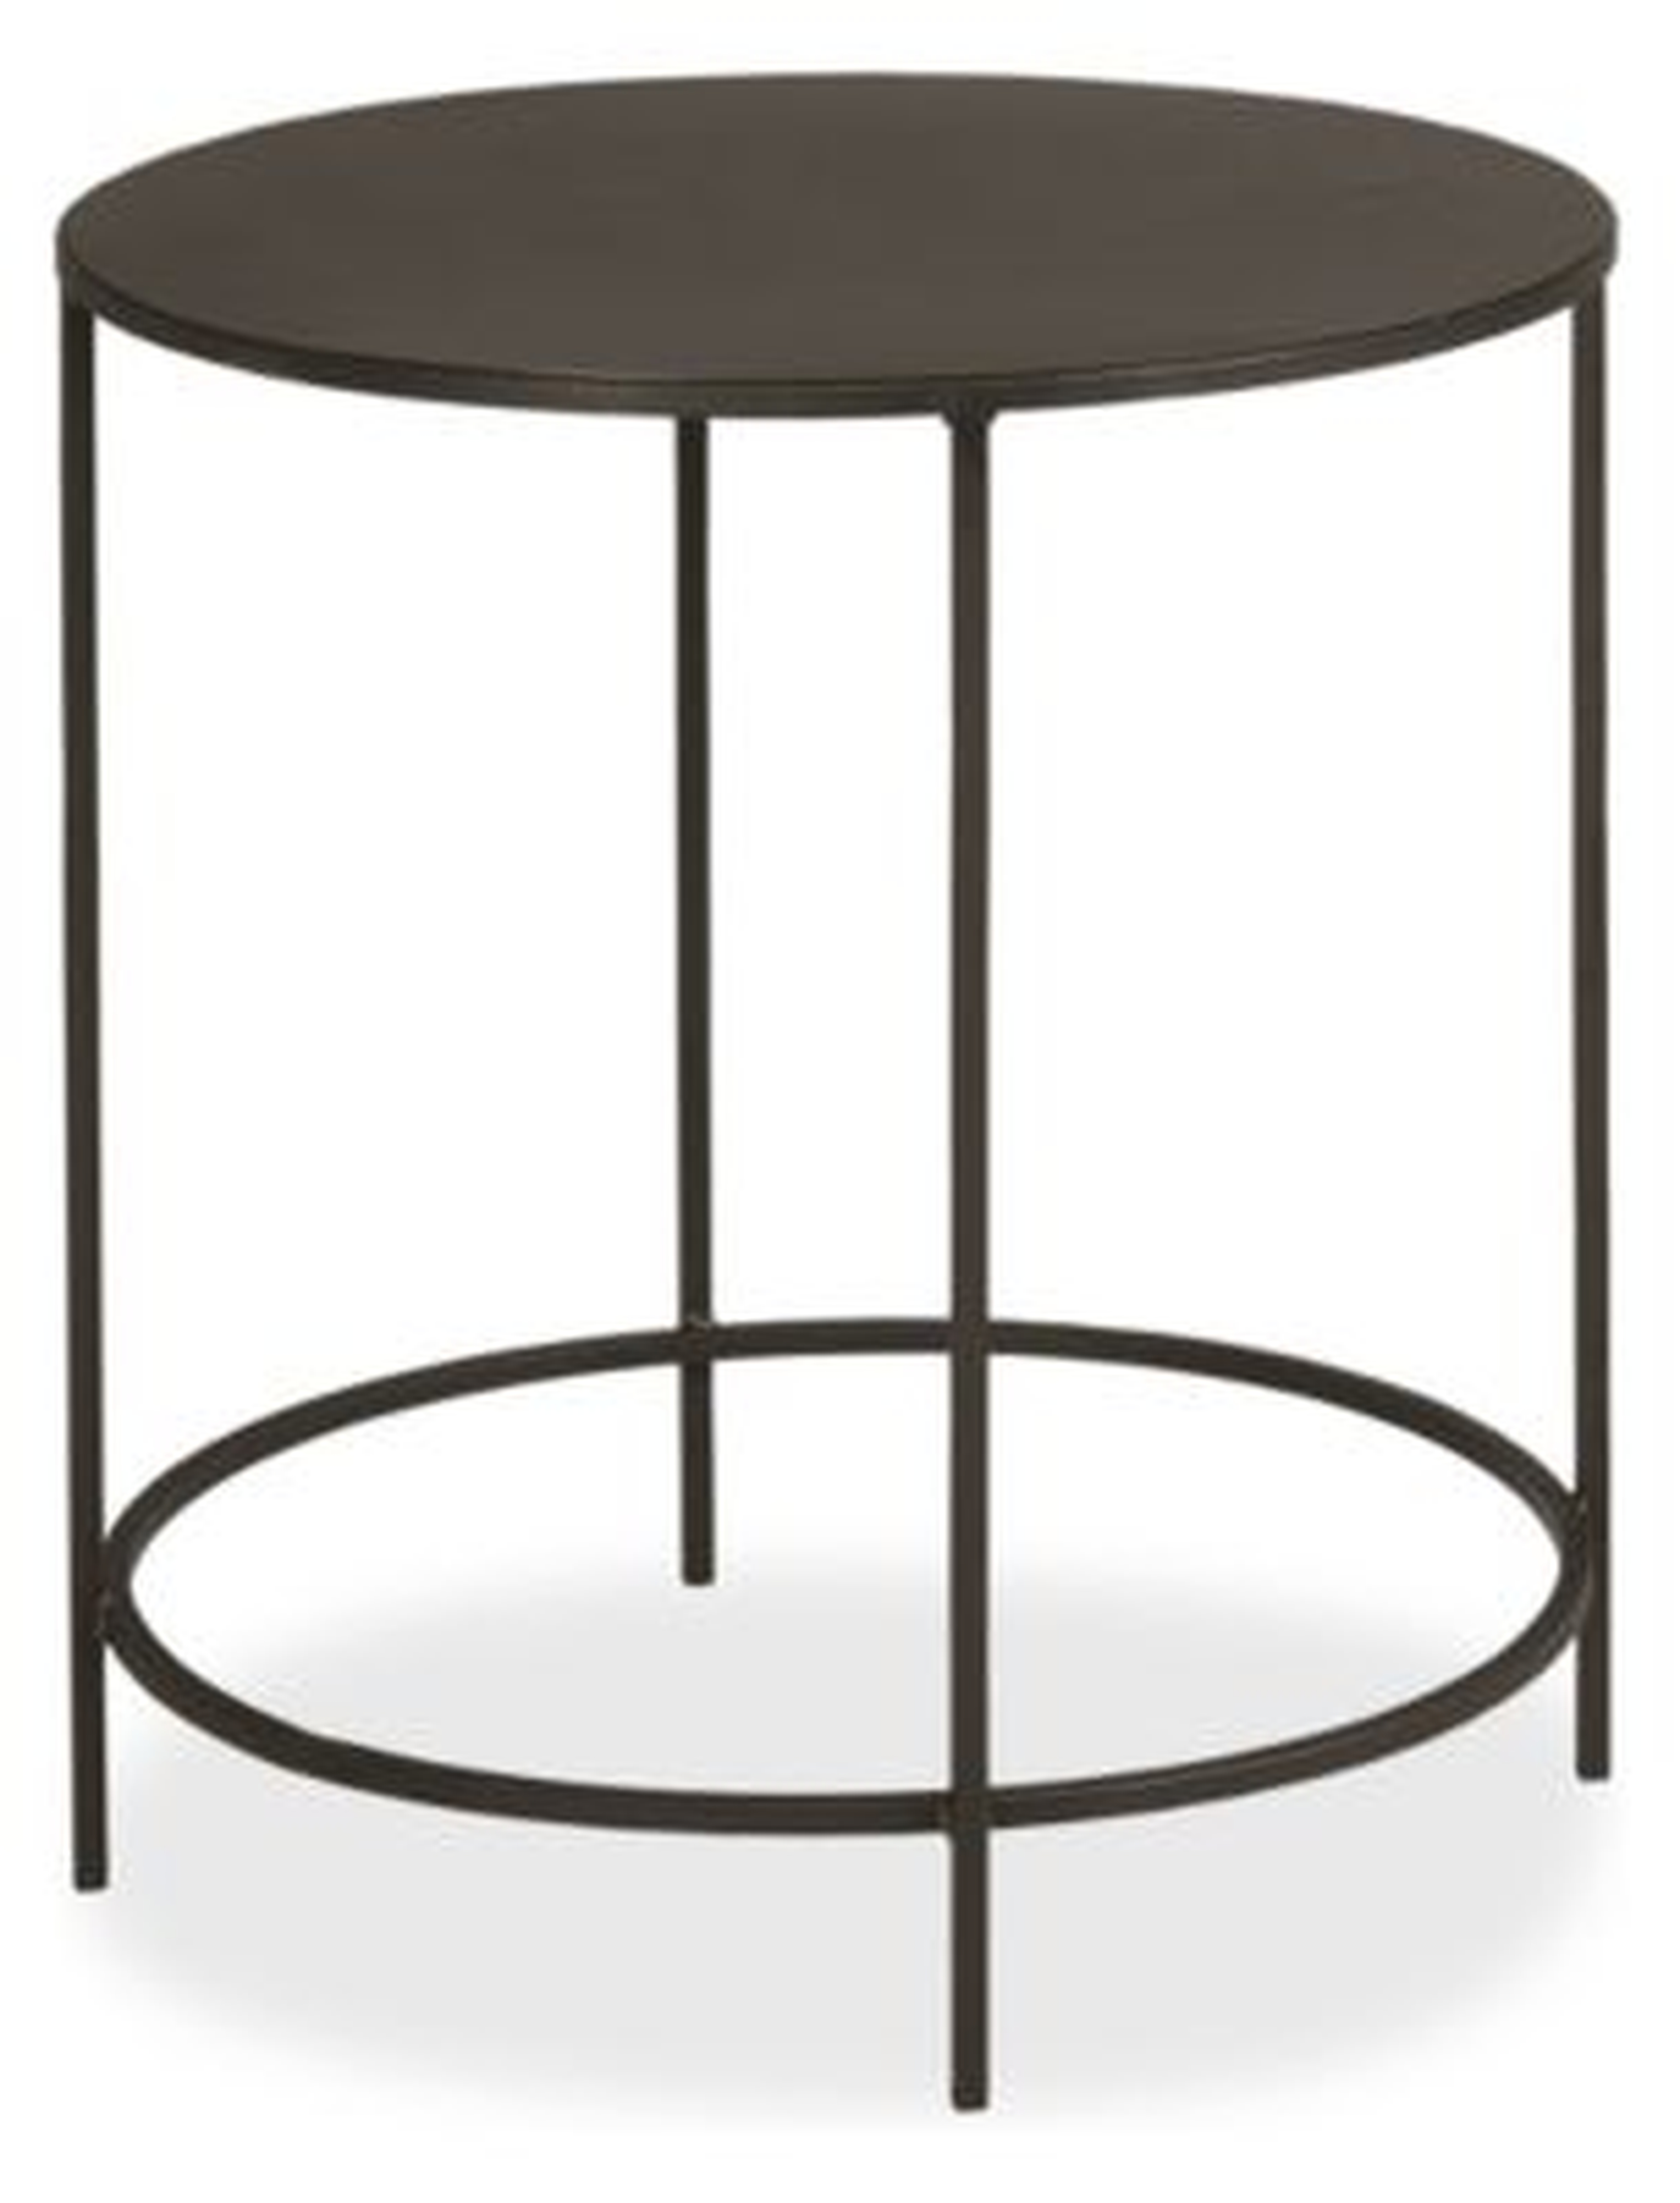 Slim Round End Tables in Natural Steel - Room & Board